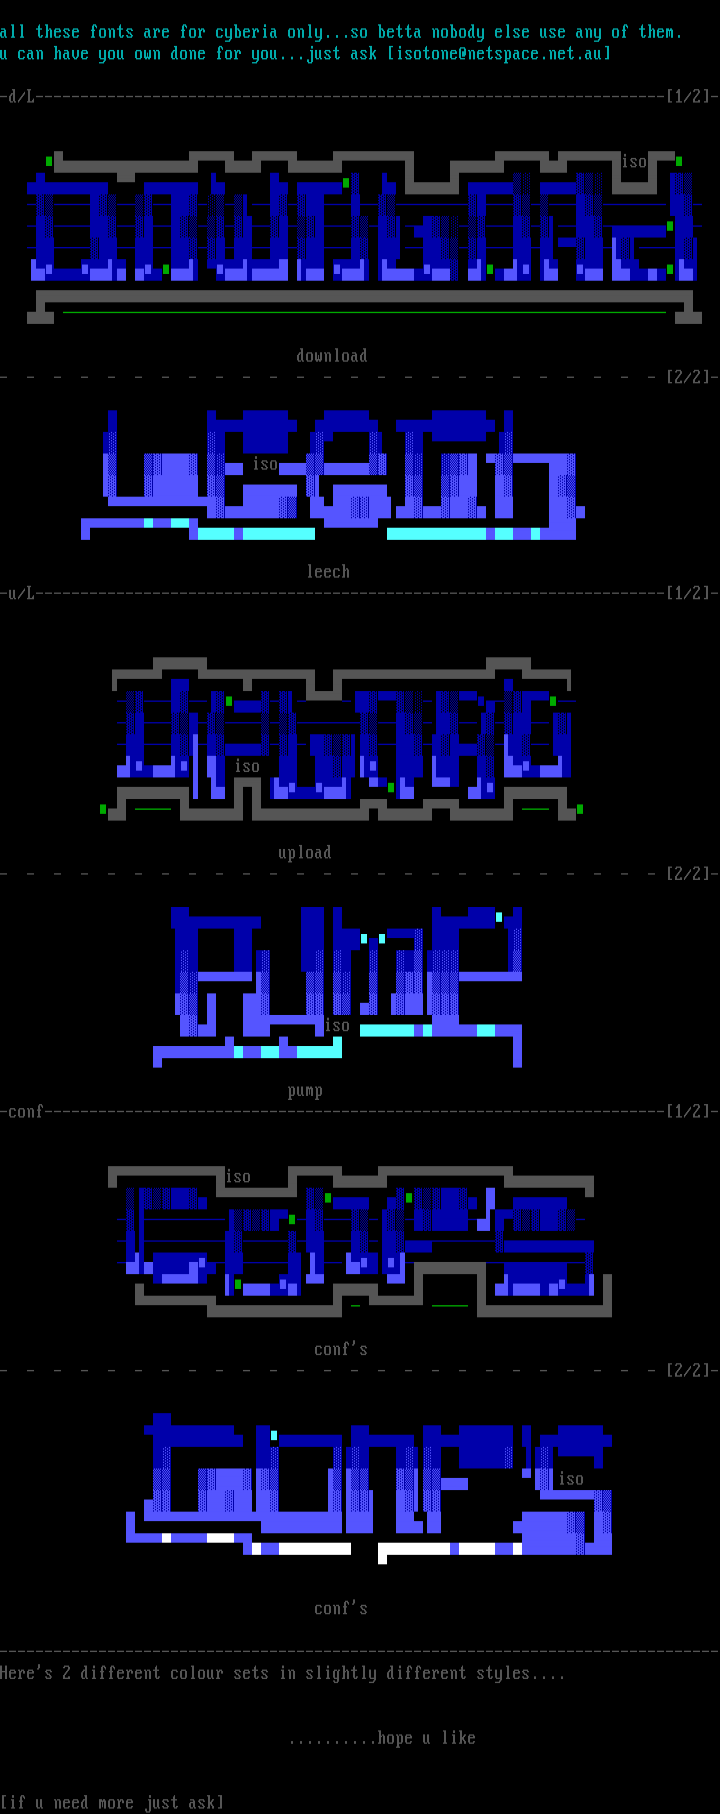 cyberia fonts... by isotone